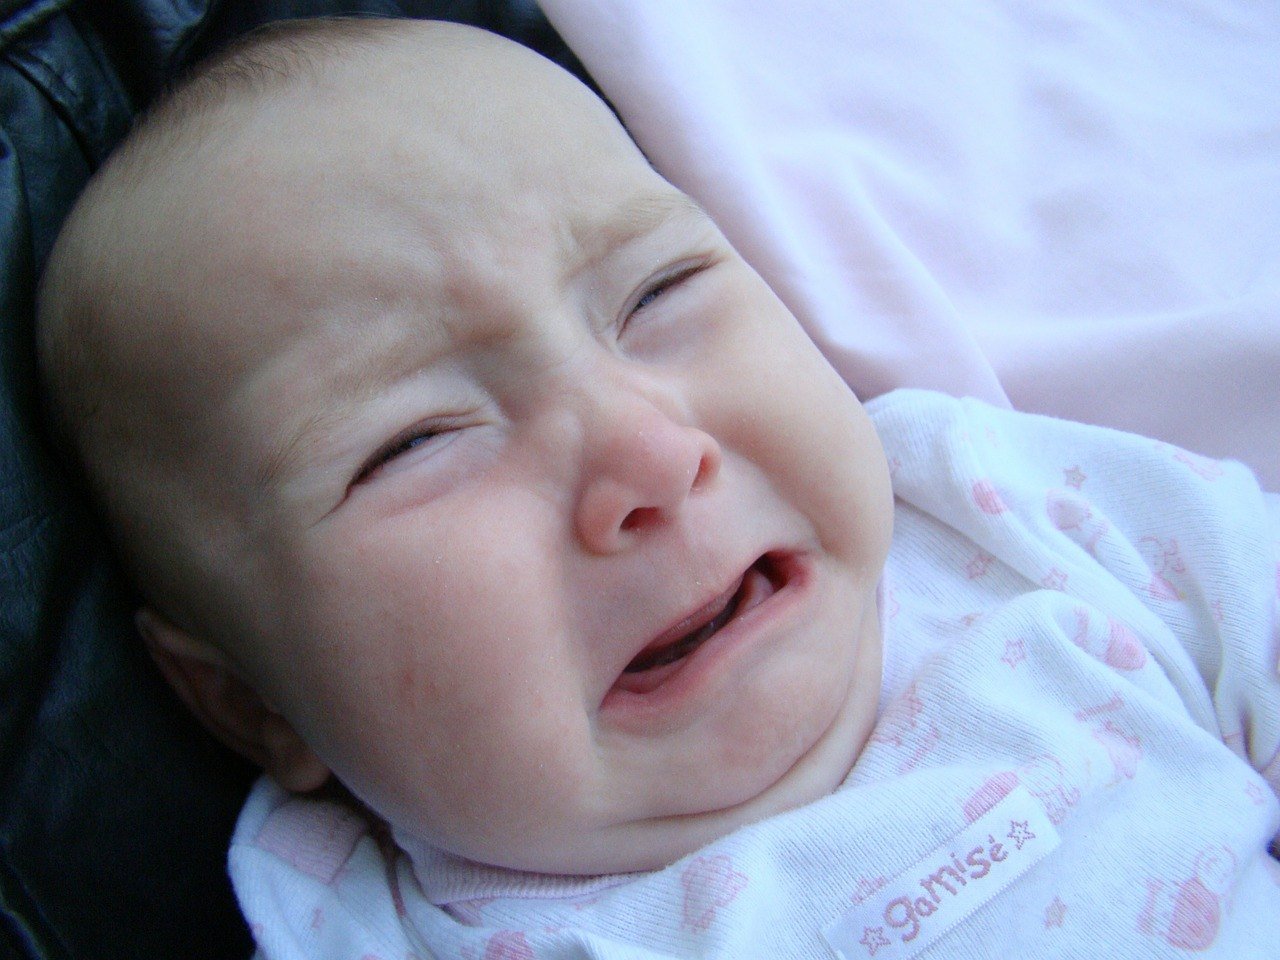 My Baby Cries All The Time: Could It Be Colic?